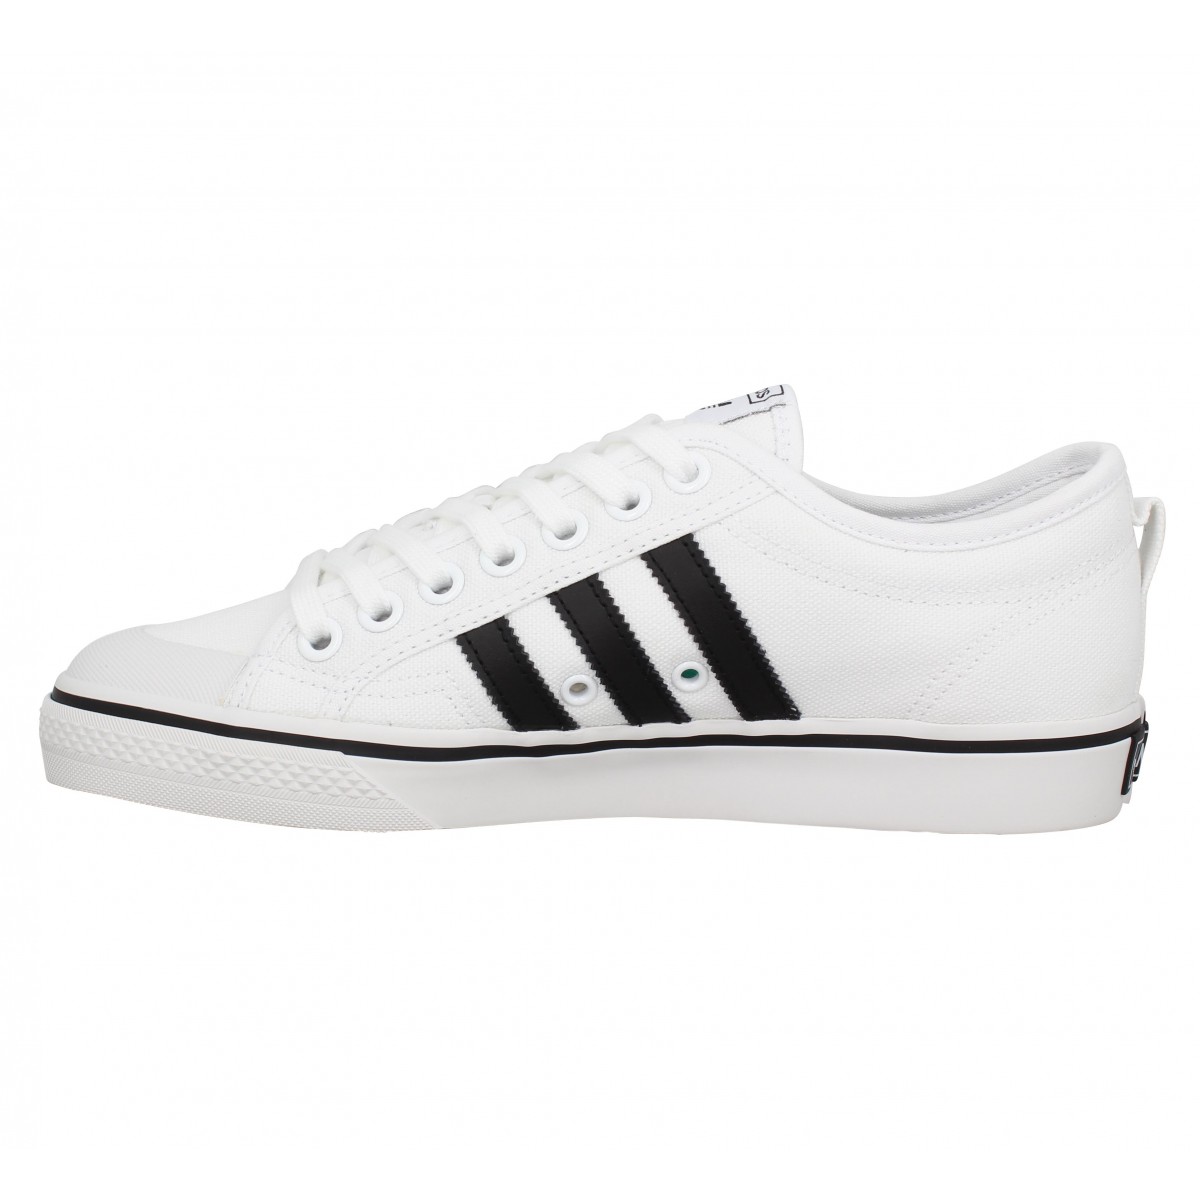 Adidas nizza toile homme blanc homme | Fanny chaussures